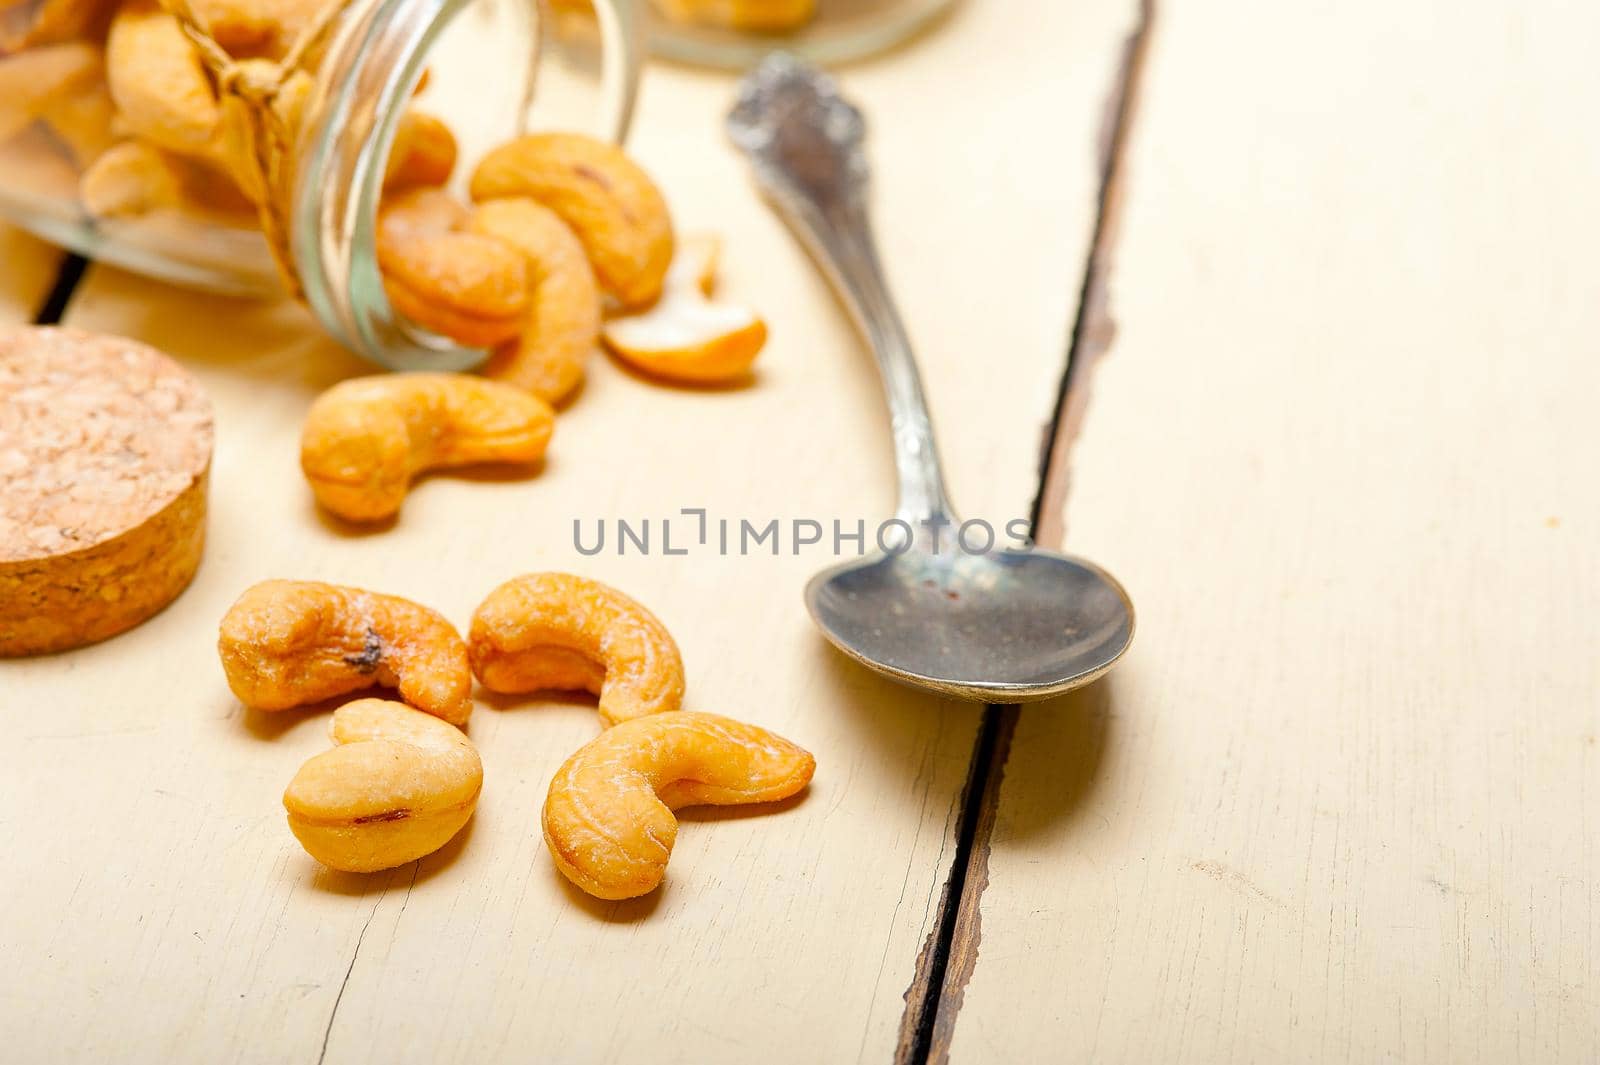 cashew nuts on a glass jar over white rustic wood table 